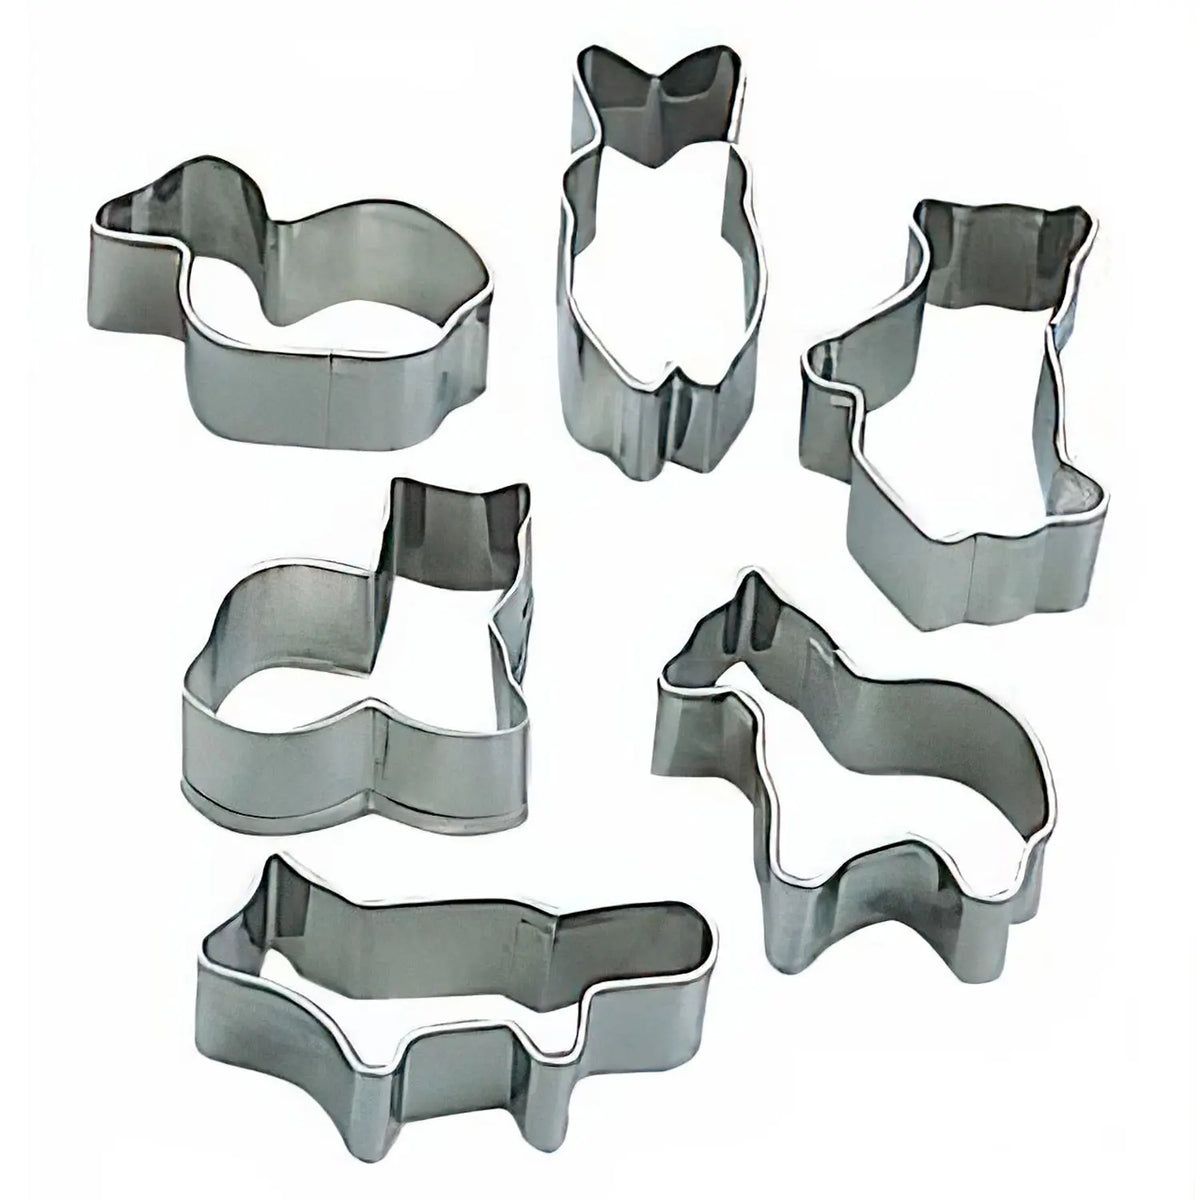 SHIMOTORI Stainless Steel Cookie Cutter 6 pcs